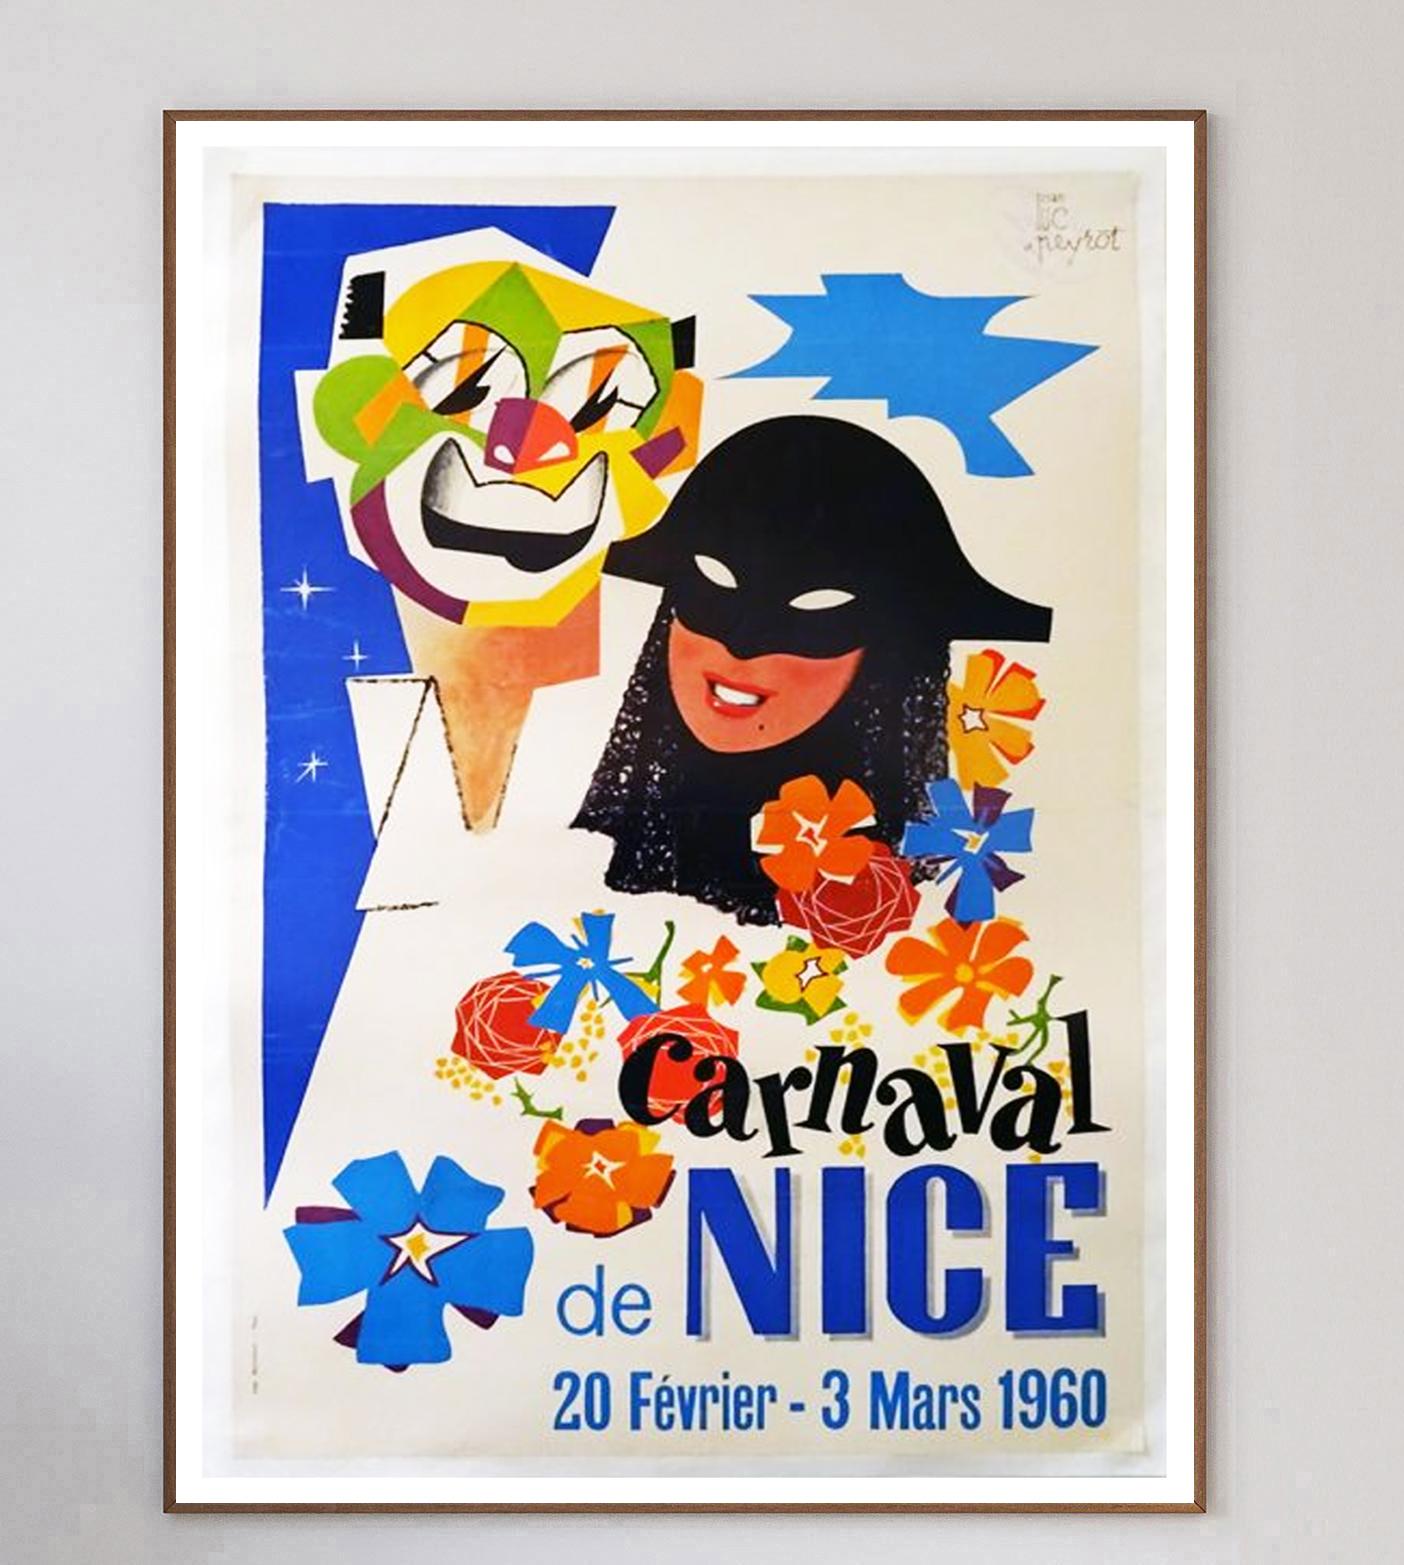 Created to promote the Carnaval de Nice in 1960 which ran from February to March of that year. The Nice Carnival is held every year and is one of the worlds premier Carnival events alongside the likes of the Rio Carnival and and Mardi Gras.

Printed